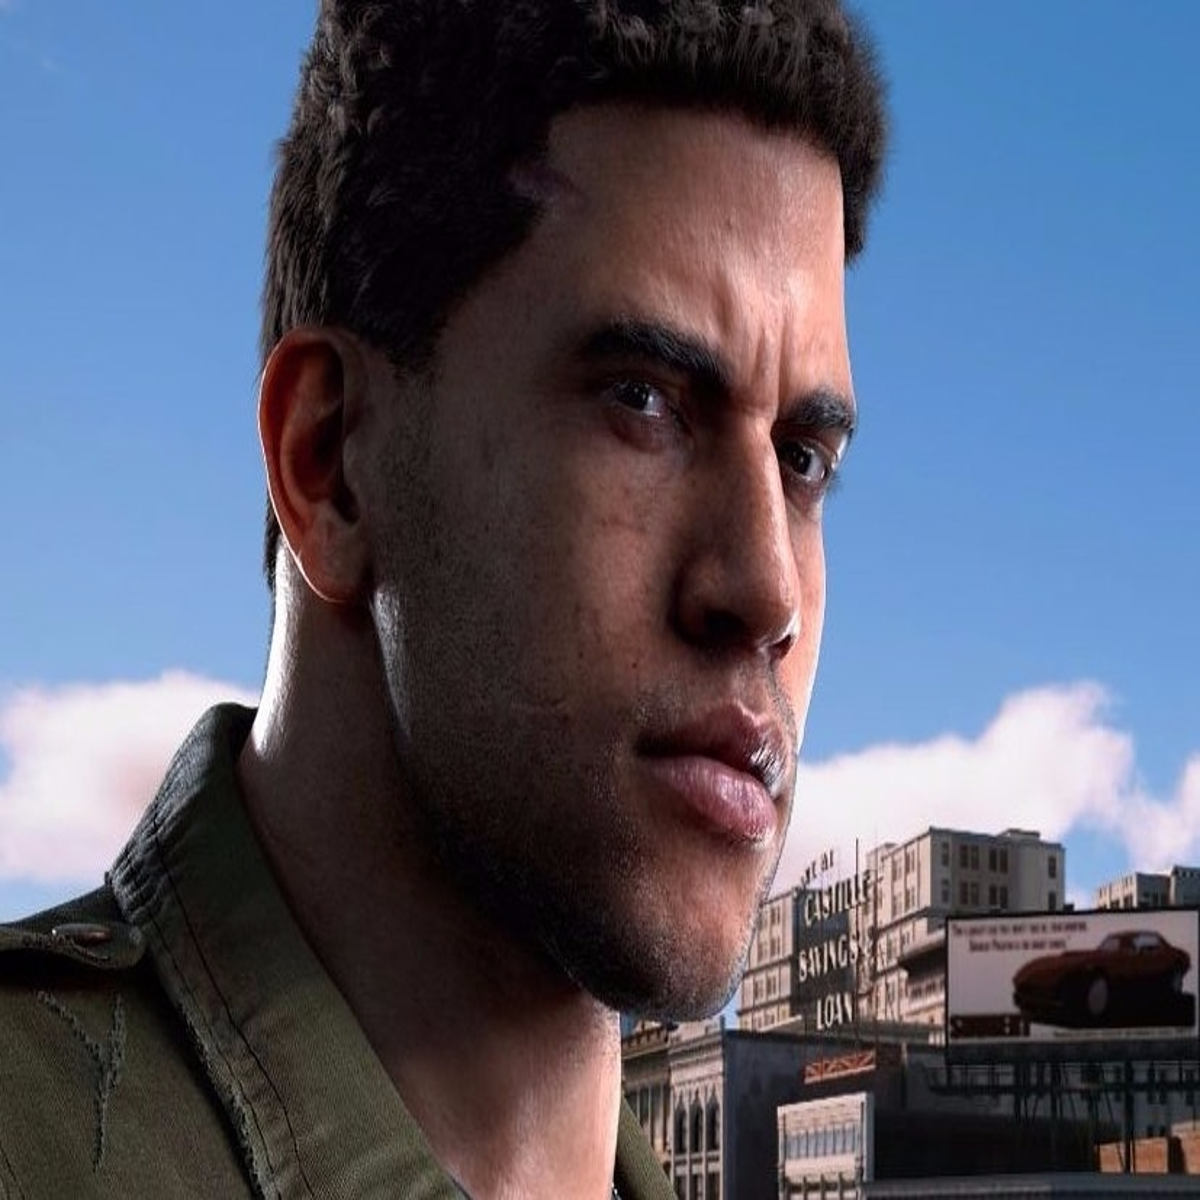 FIFA 17 fends off Mafia 3 for its second week at the top of the UK charts